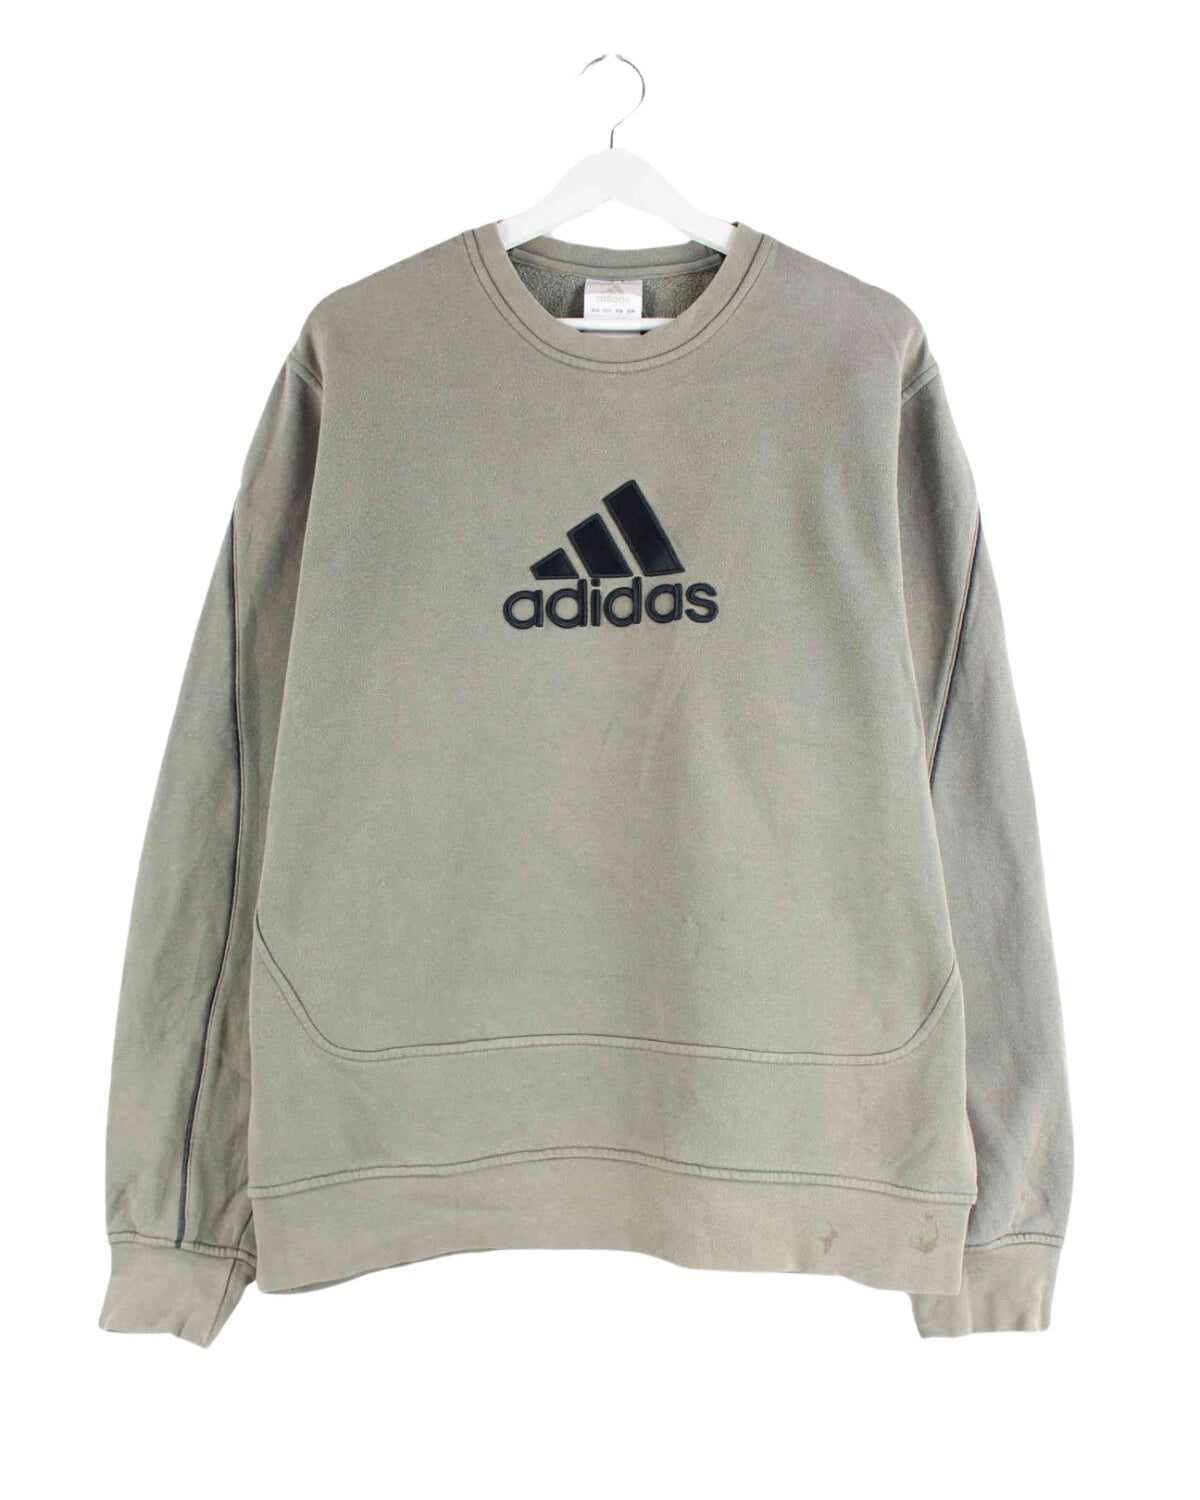 Adidas y2k Big Logo Embroidered Sweater Olive L (front image)